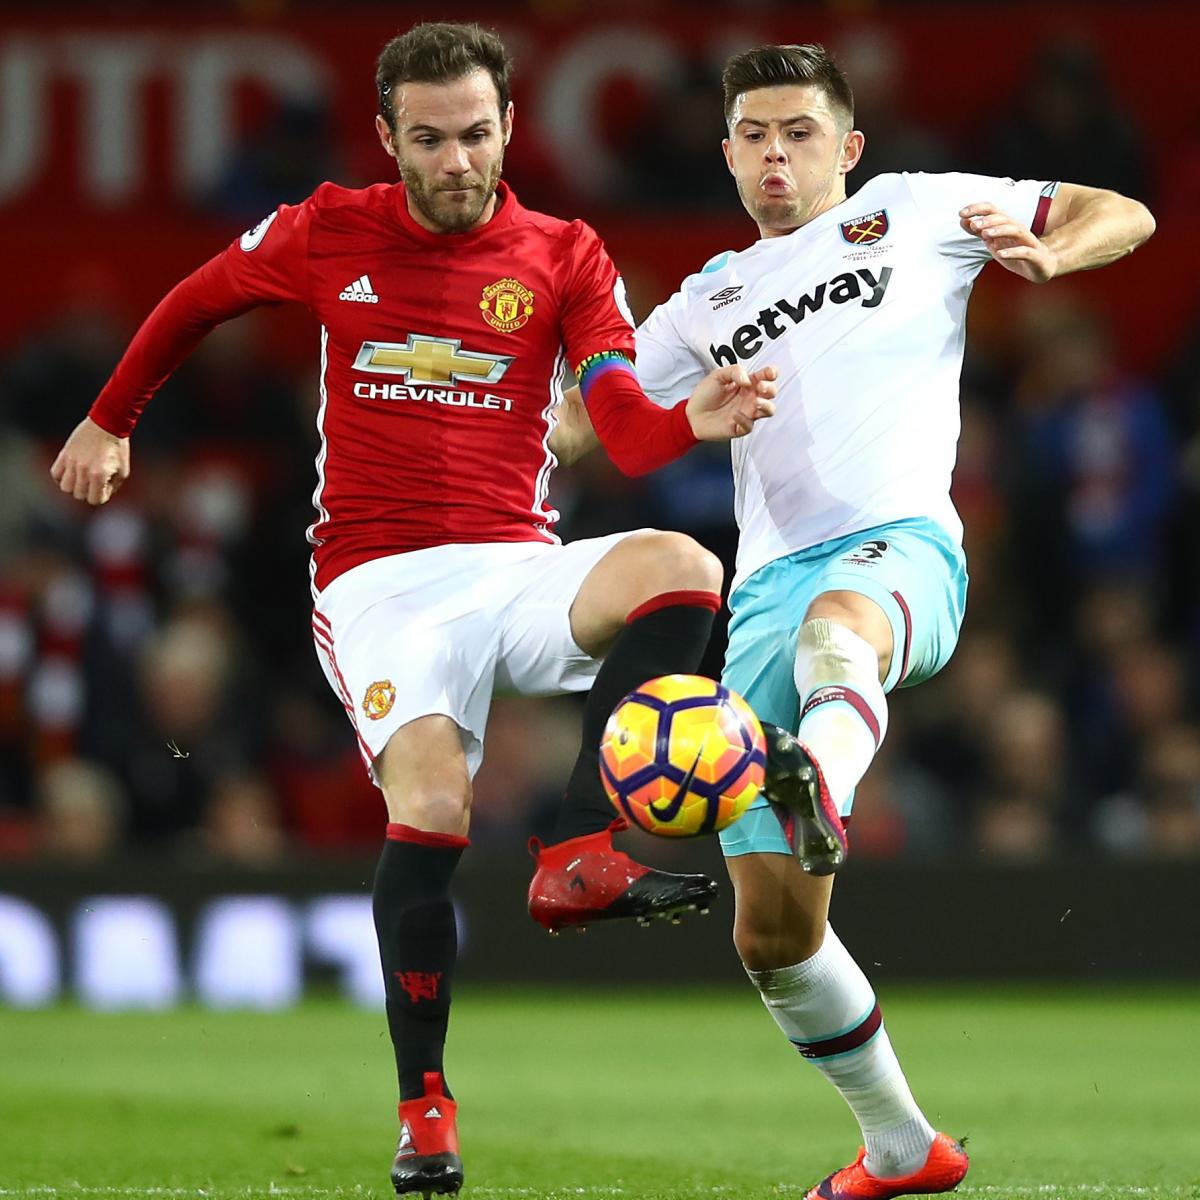 Manchester United vs. West Ham: Live Score, Highlights from Premier